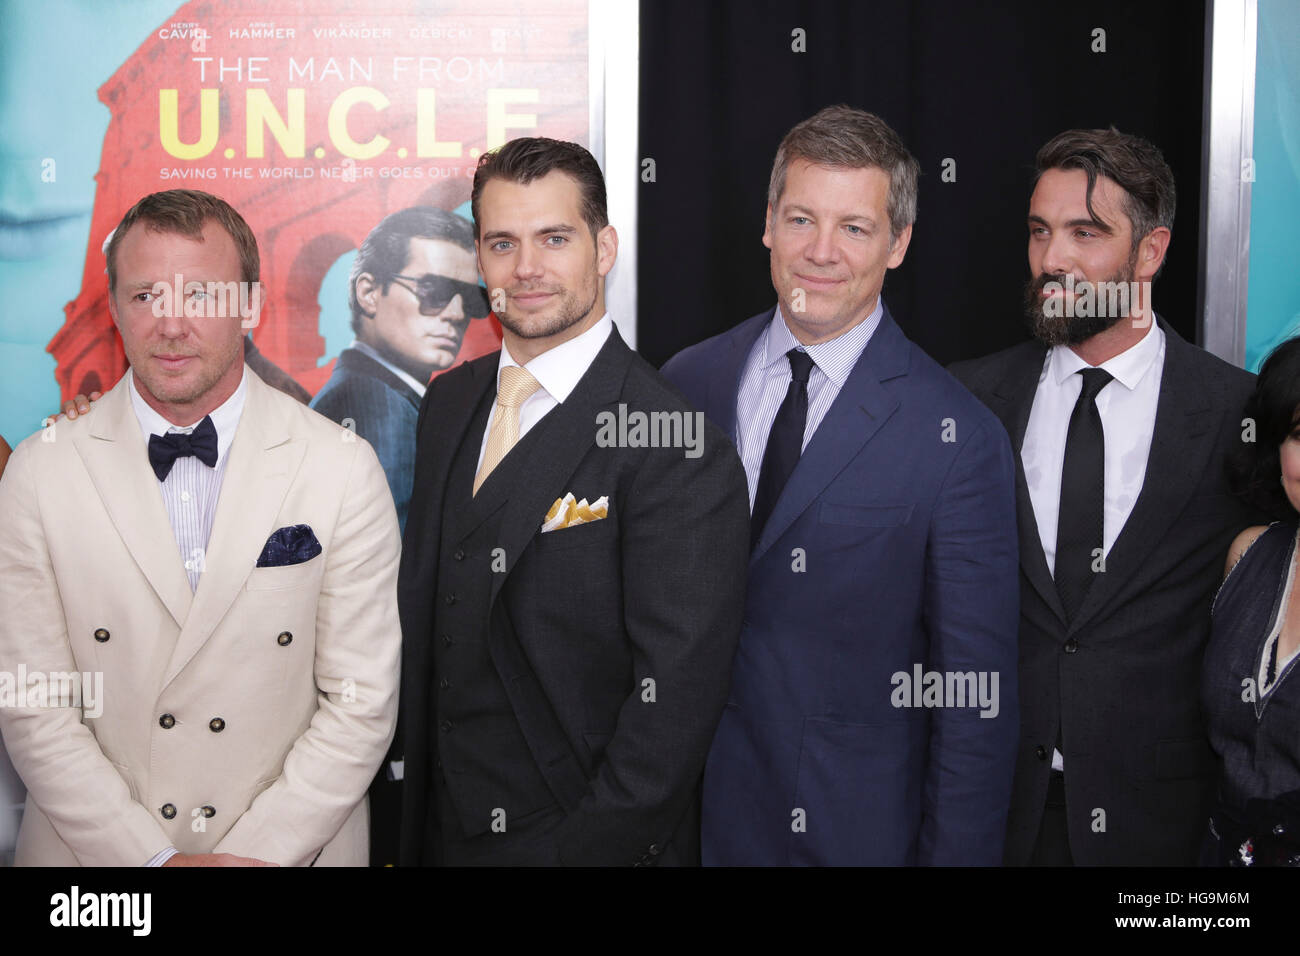 Guy Ritchie, Henry Cavill, Lionel Wigram and Luca Cavalli arrive at The Man From U.N.C.L.E premiere at the Zigfield Theater in NYC. Stock Photo